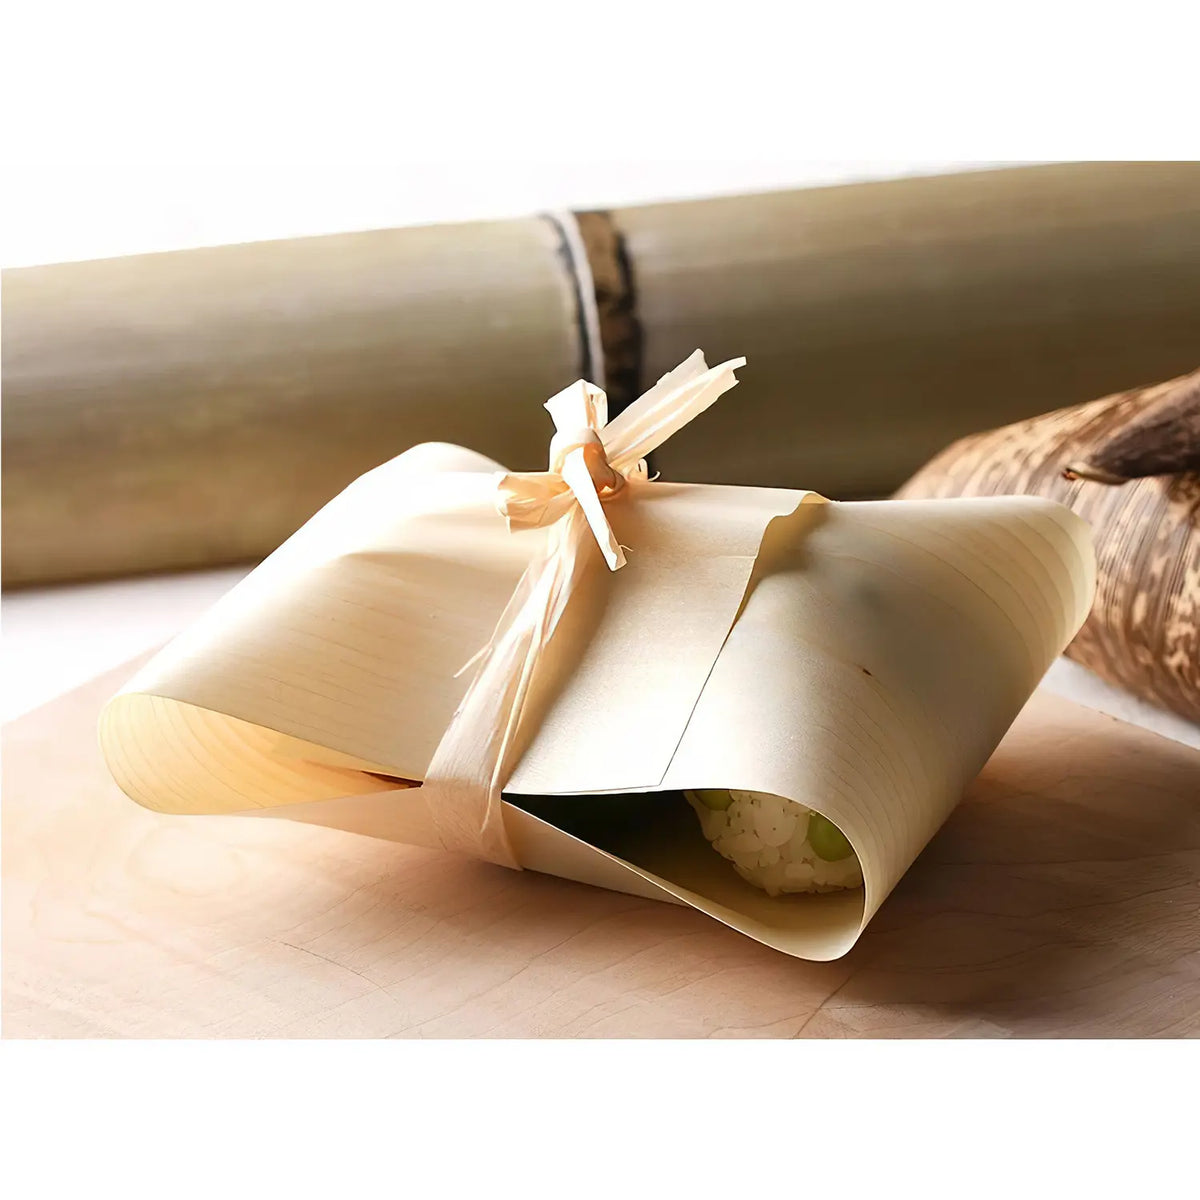 Yamacoh Naturalist Food Wrapping Material